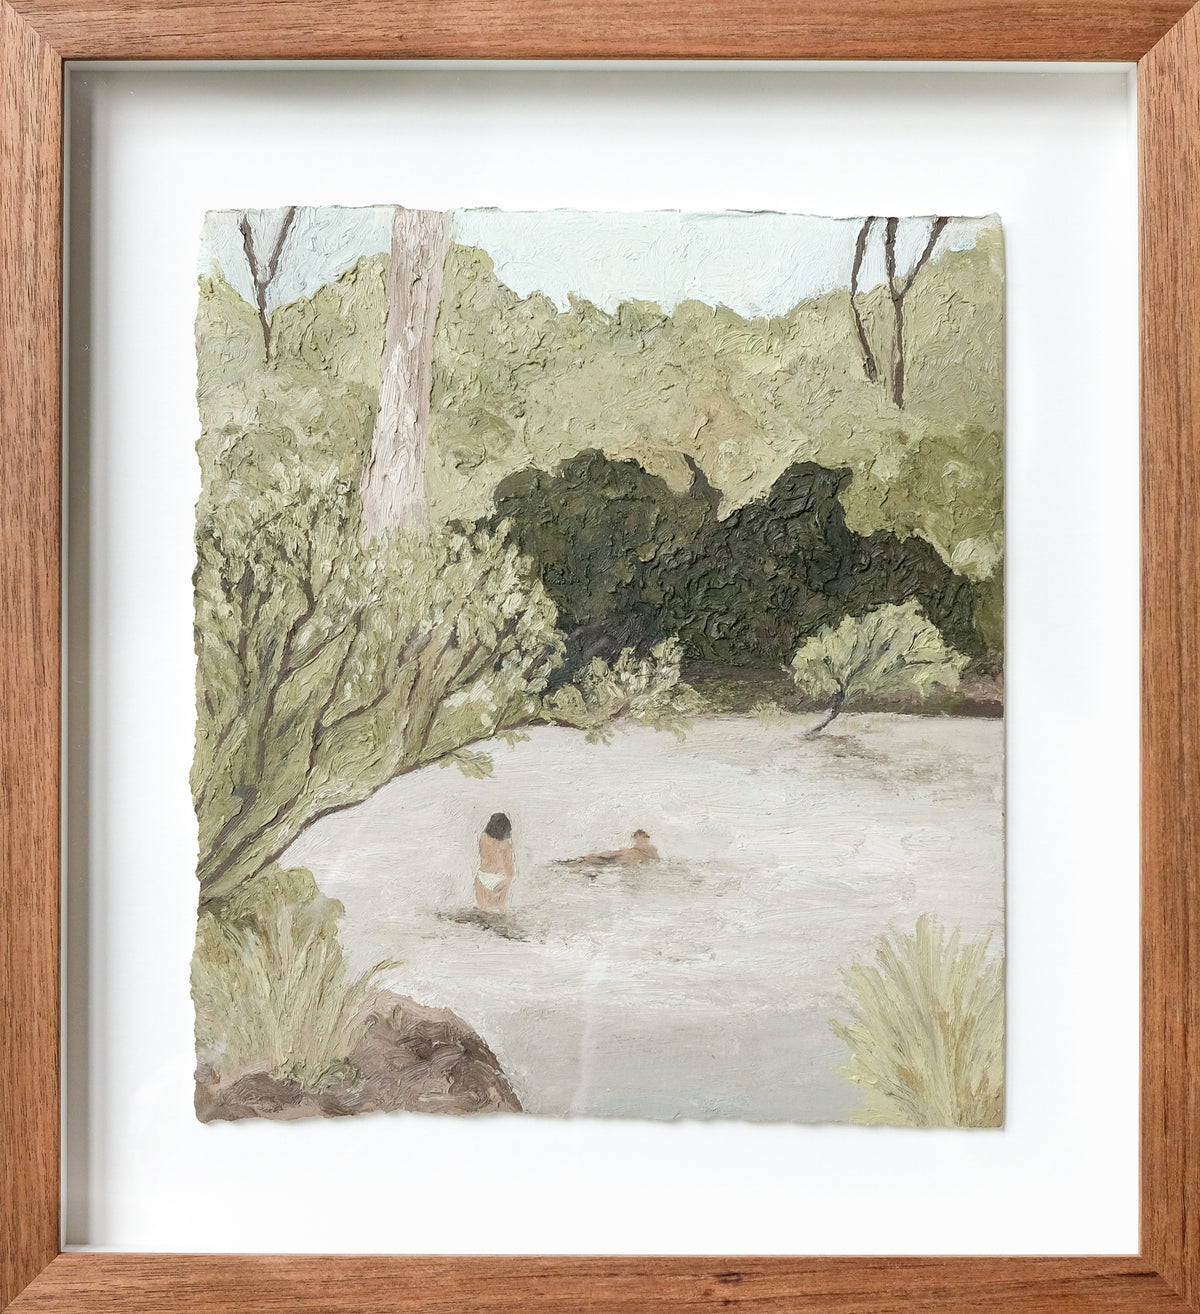 Chloe Caday | Afternoon Bathers